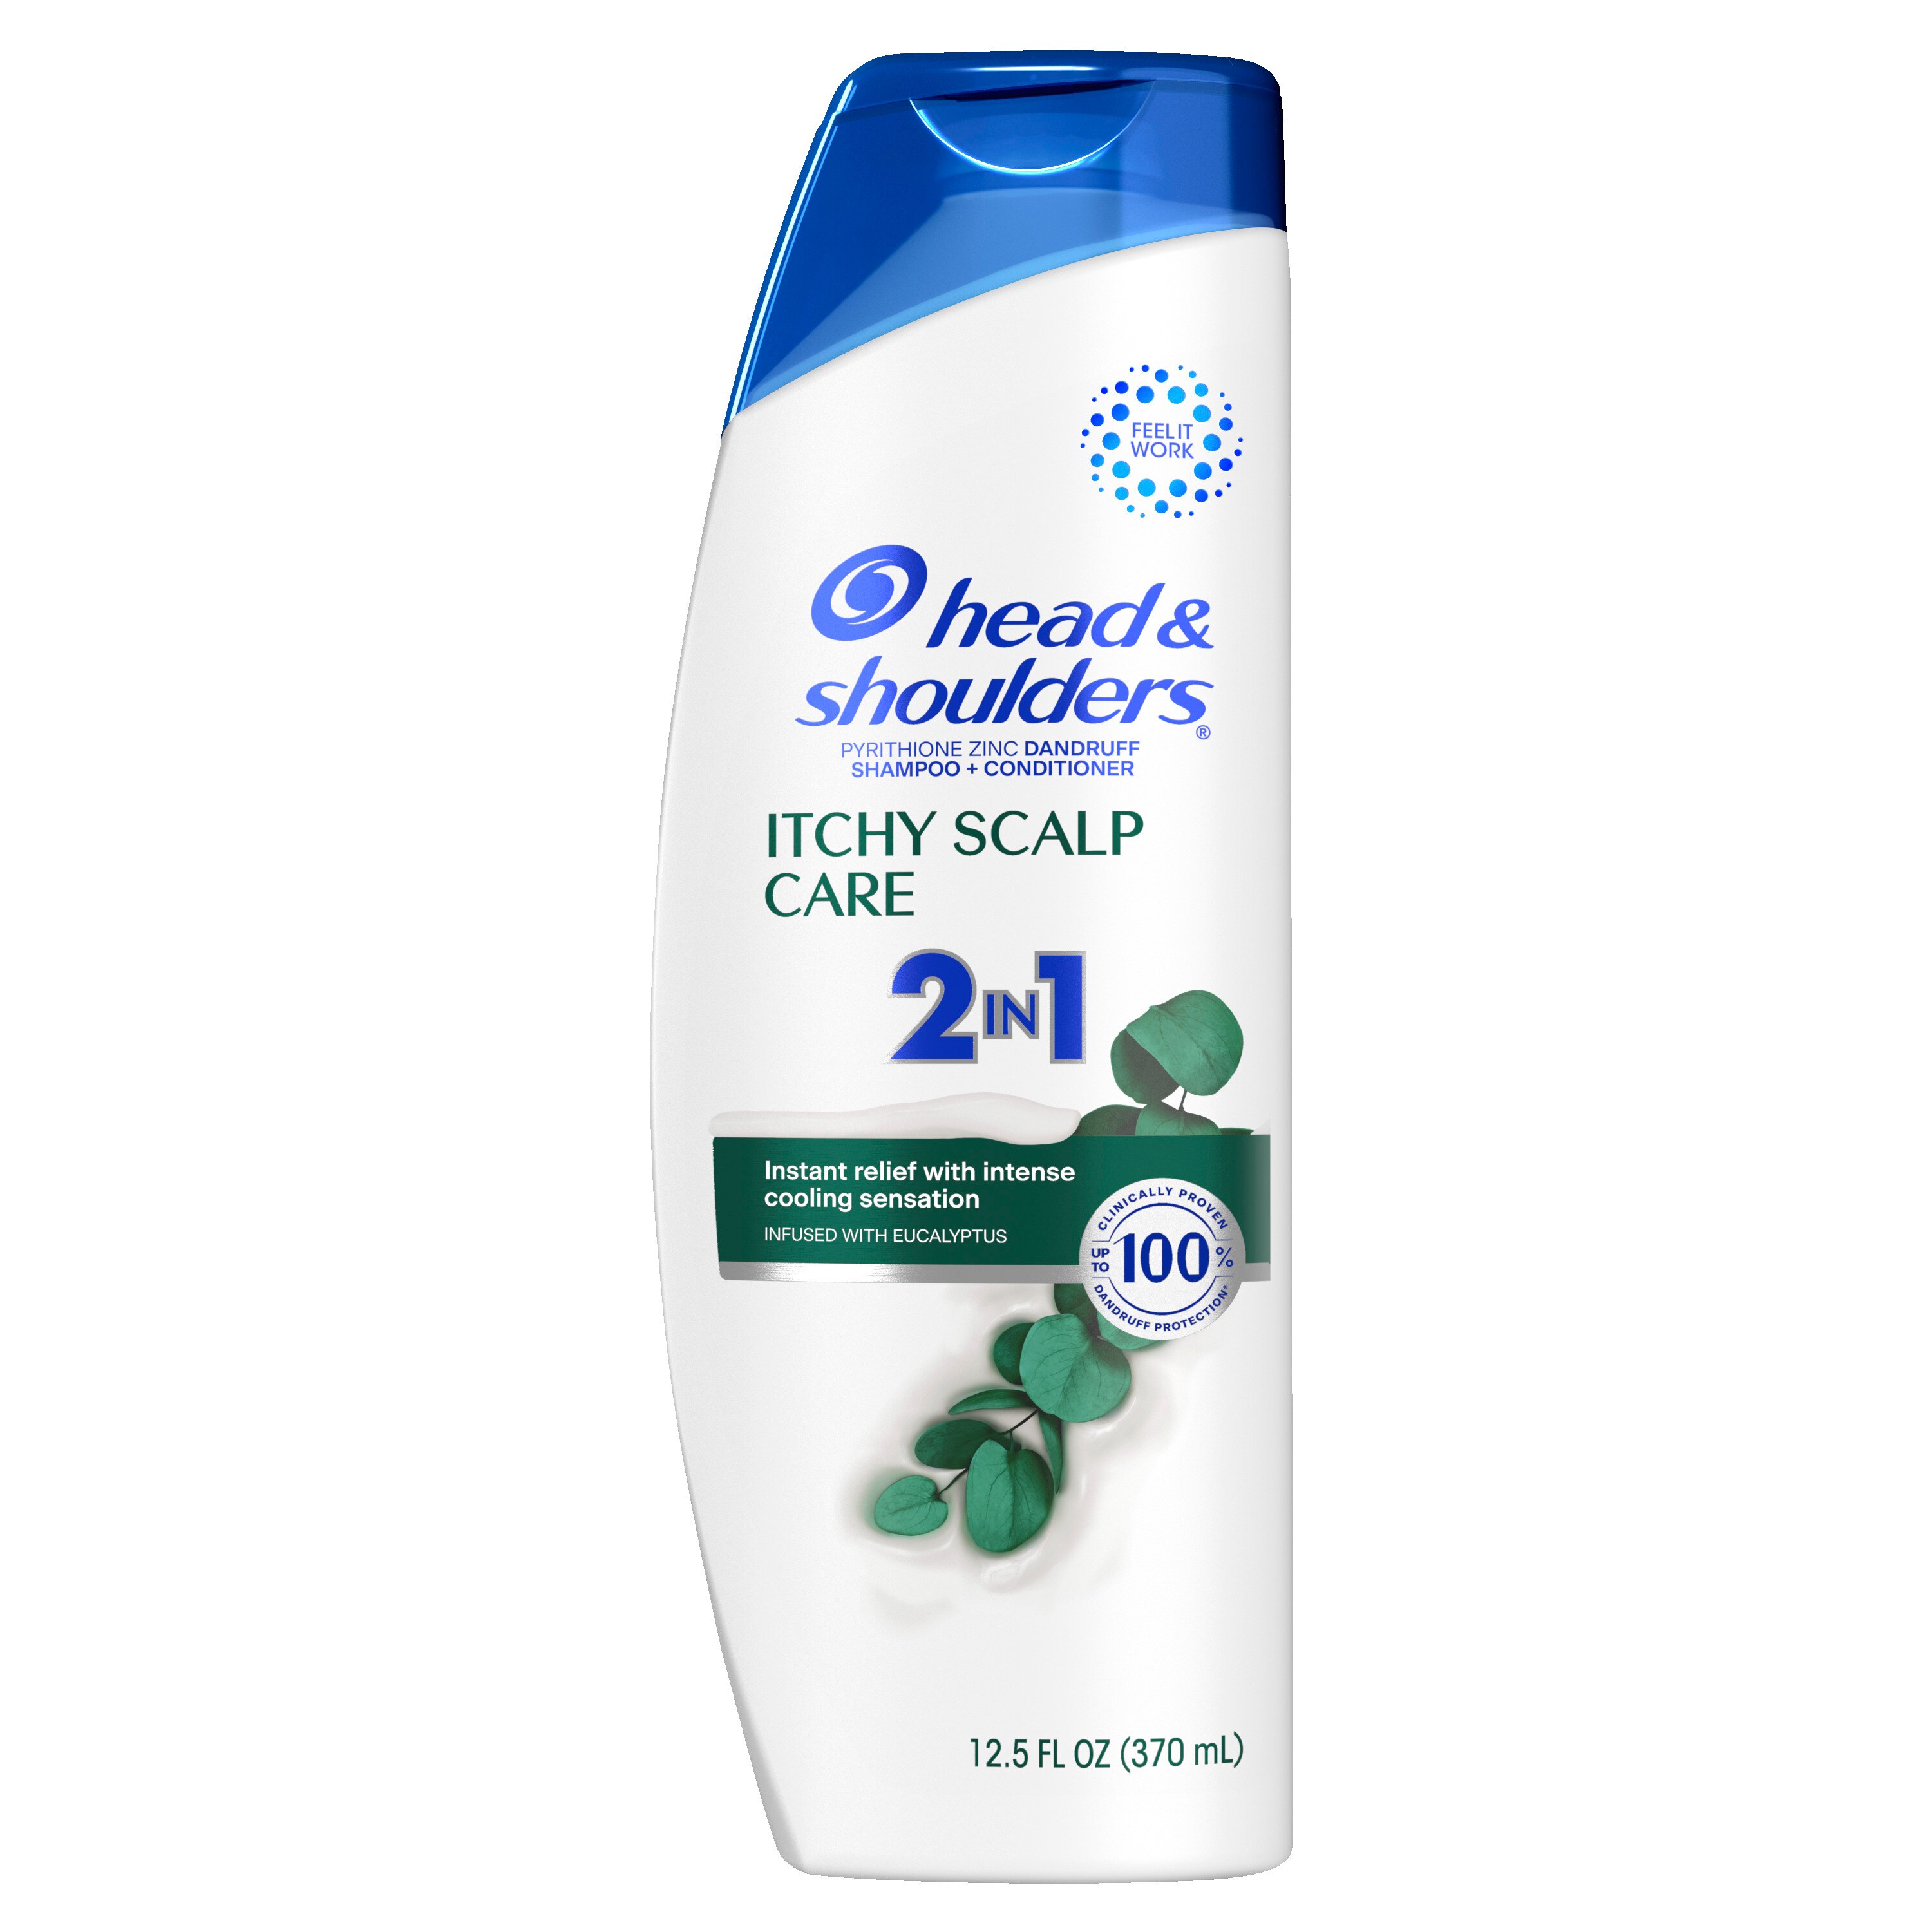 Head & Shoulders Itchy Scalp Care with Eucalyptus 2-in-1 Dandruff Shampoo + Conditioner, 13.5 OZ